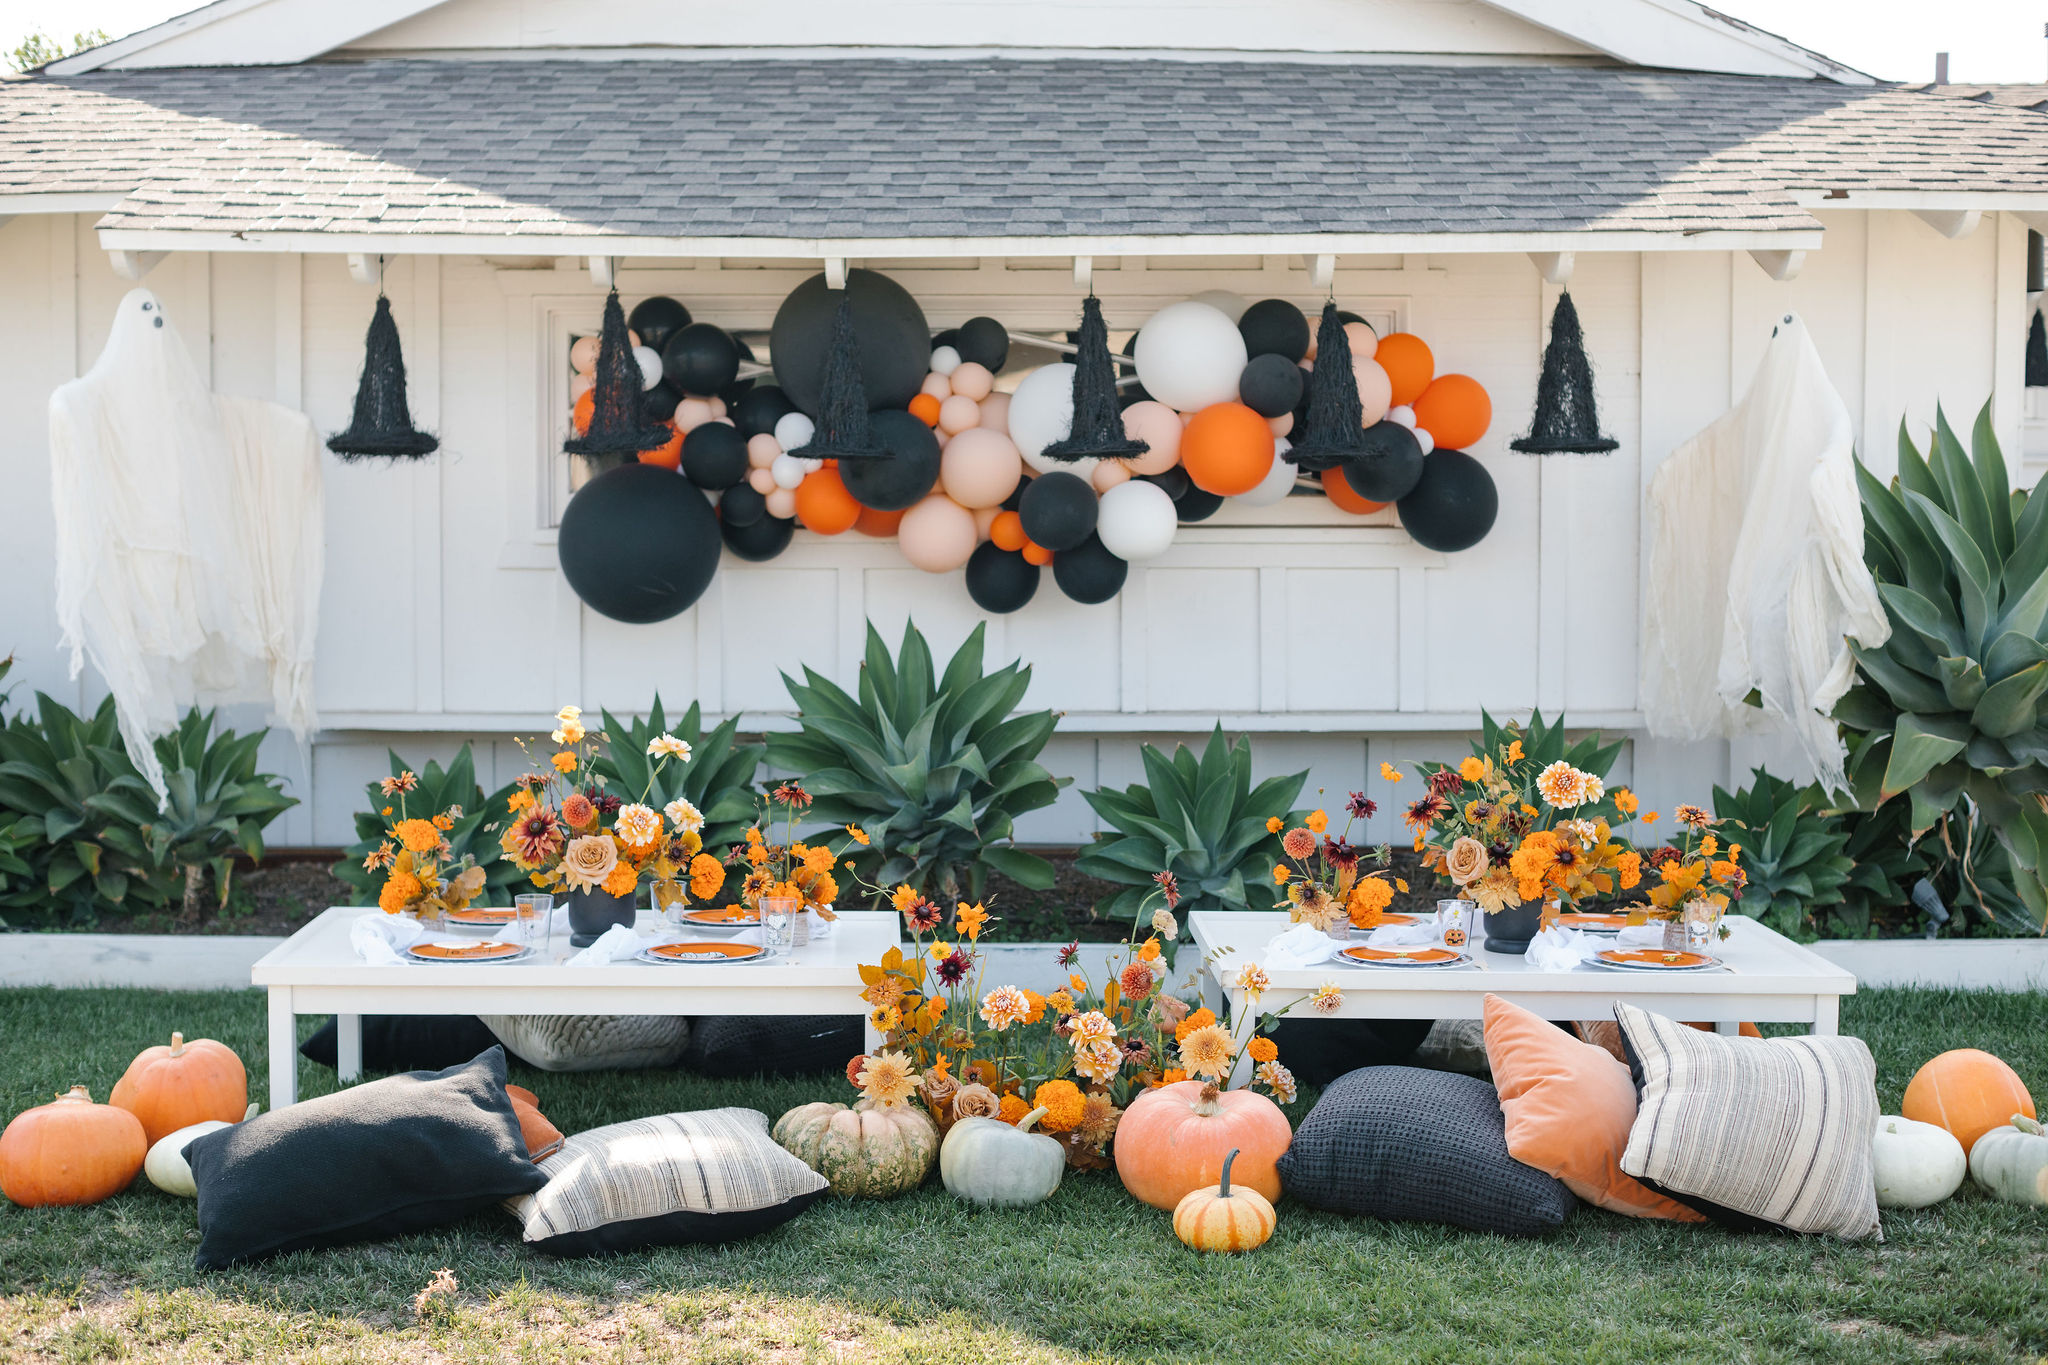 The Happiest Halloween Party with Pottery Barn Kids To Kick off Fall!